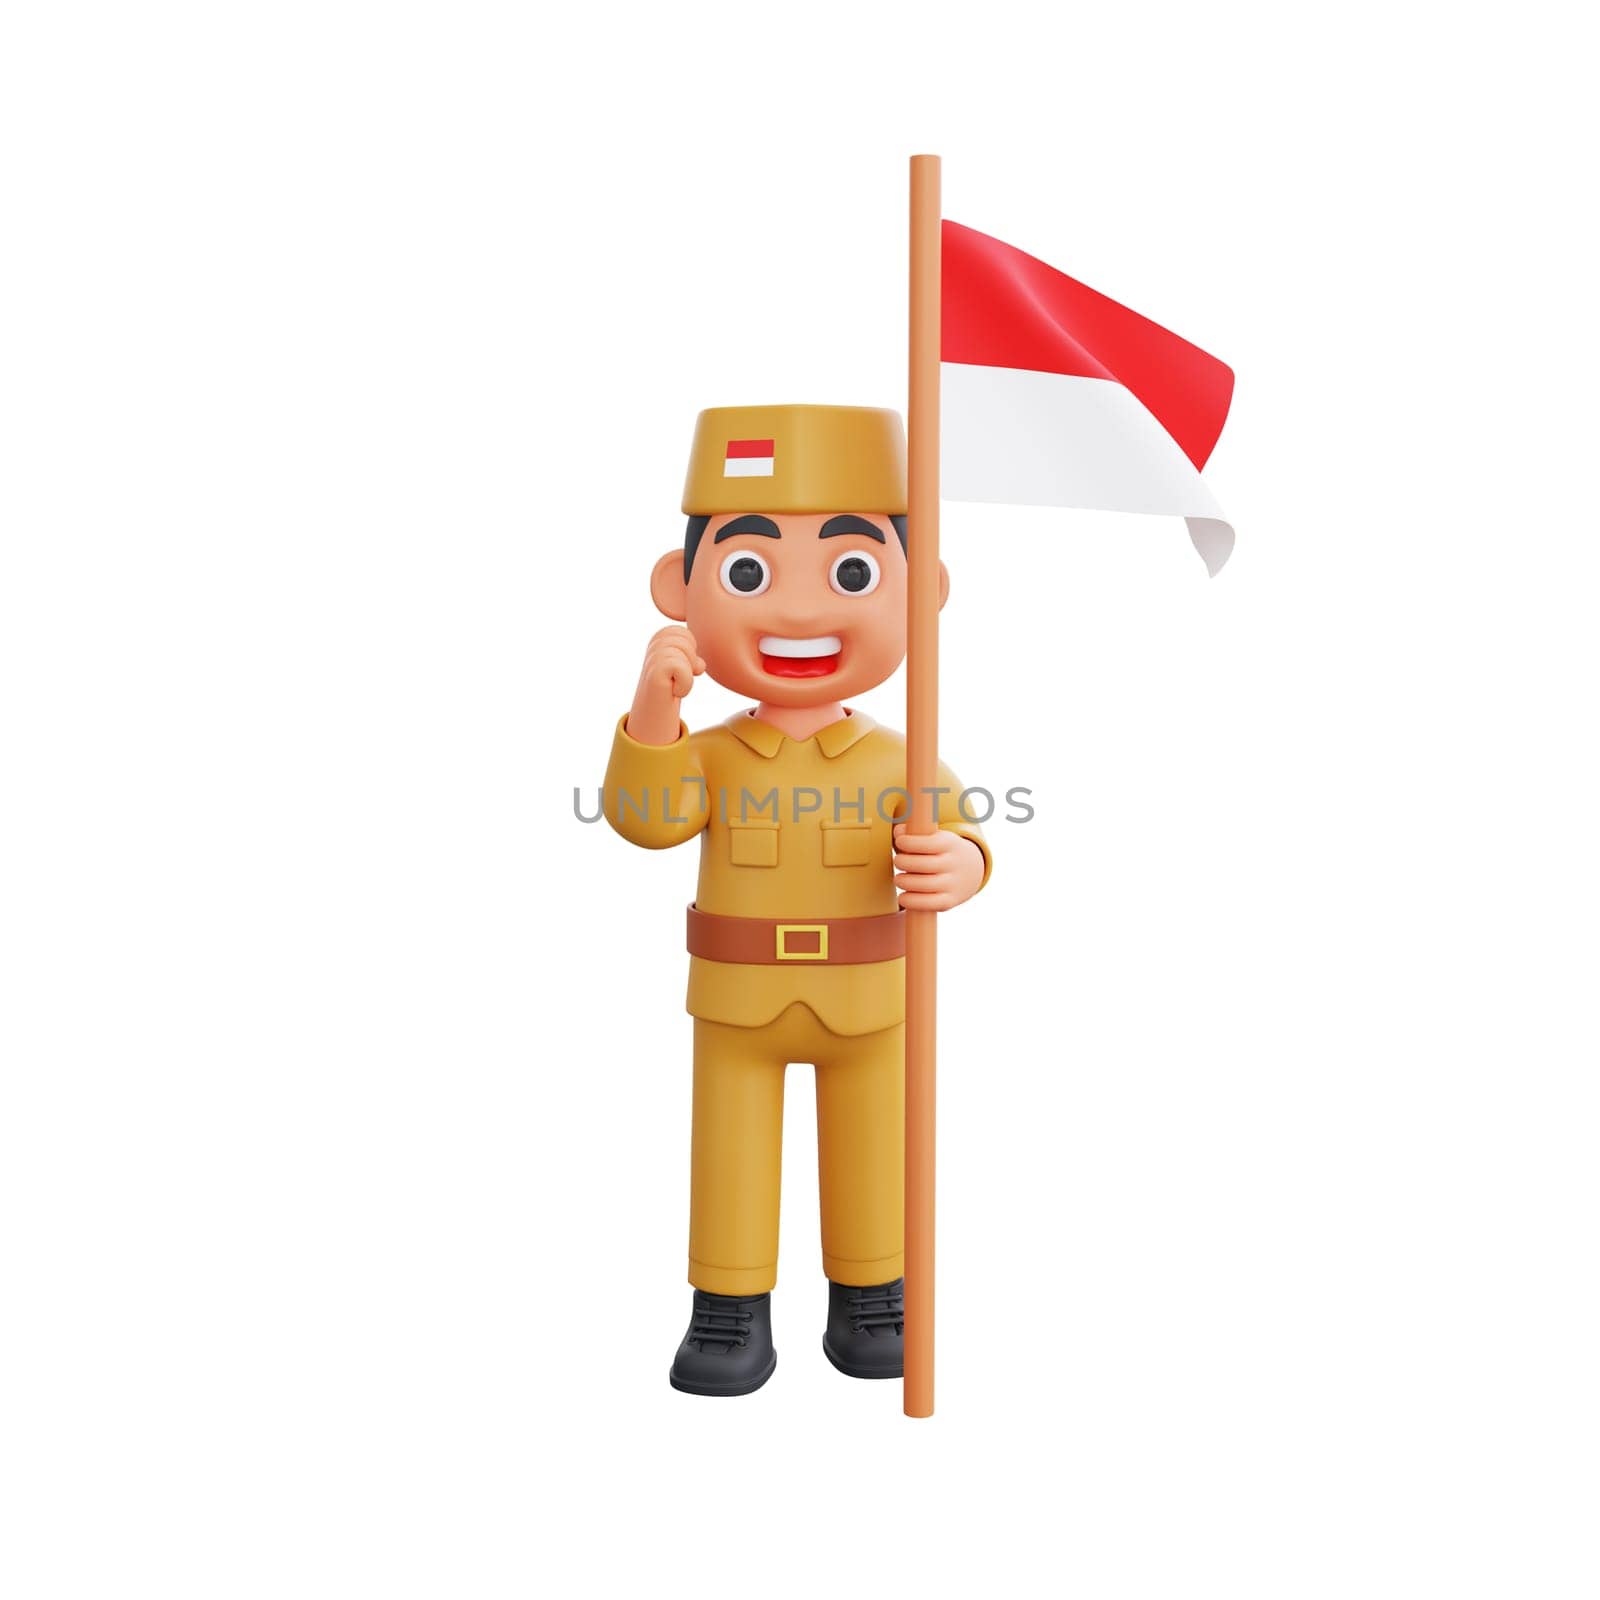 3d warrior character with indonesian independence day concept